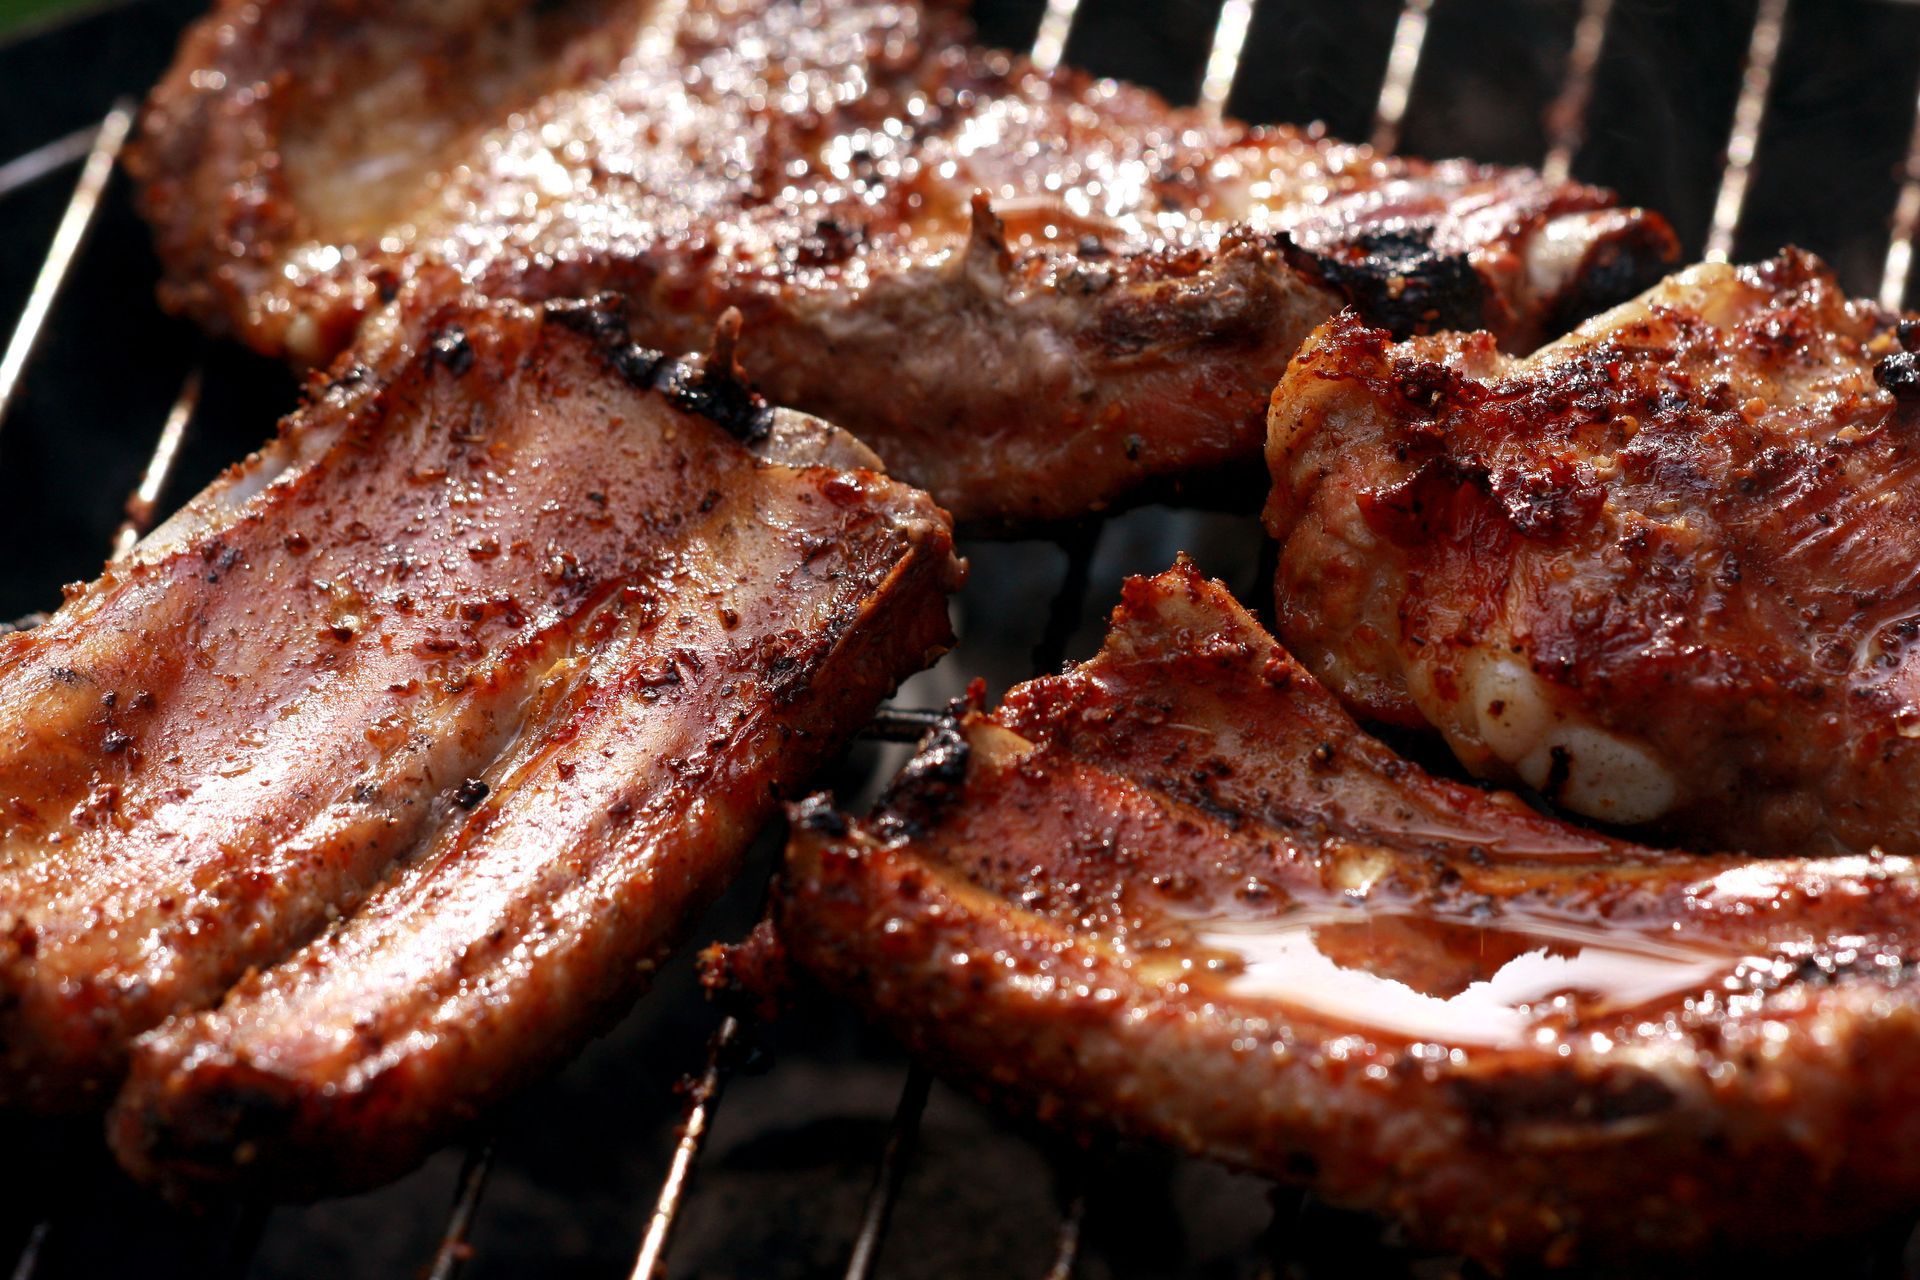 A close up of ribs cooking on a grill